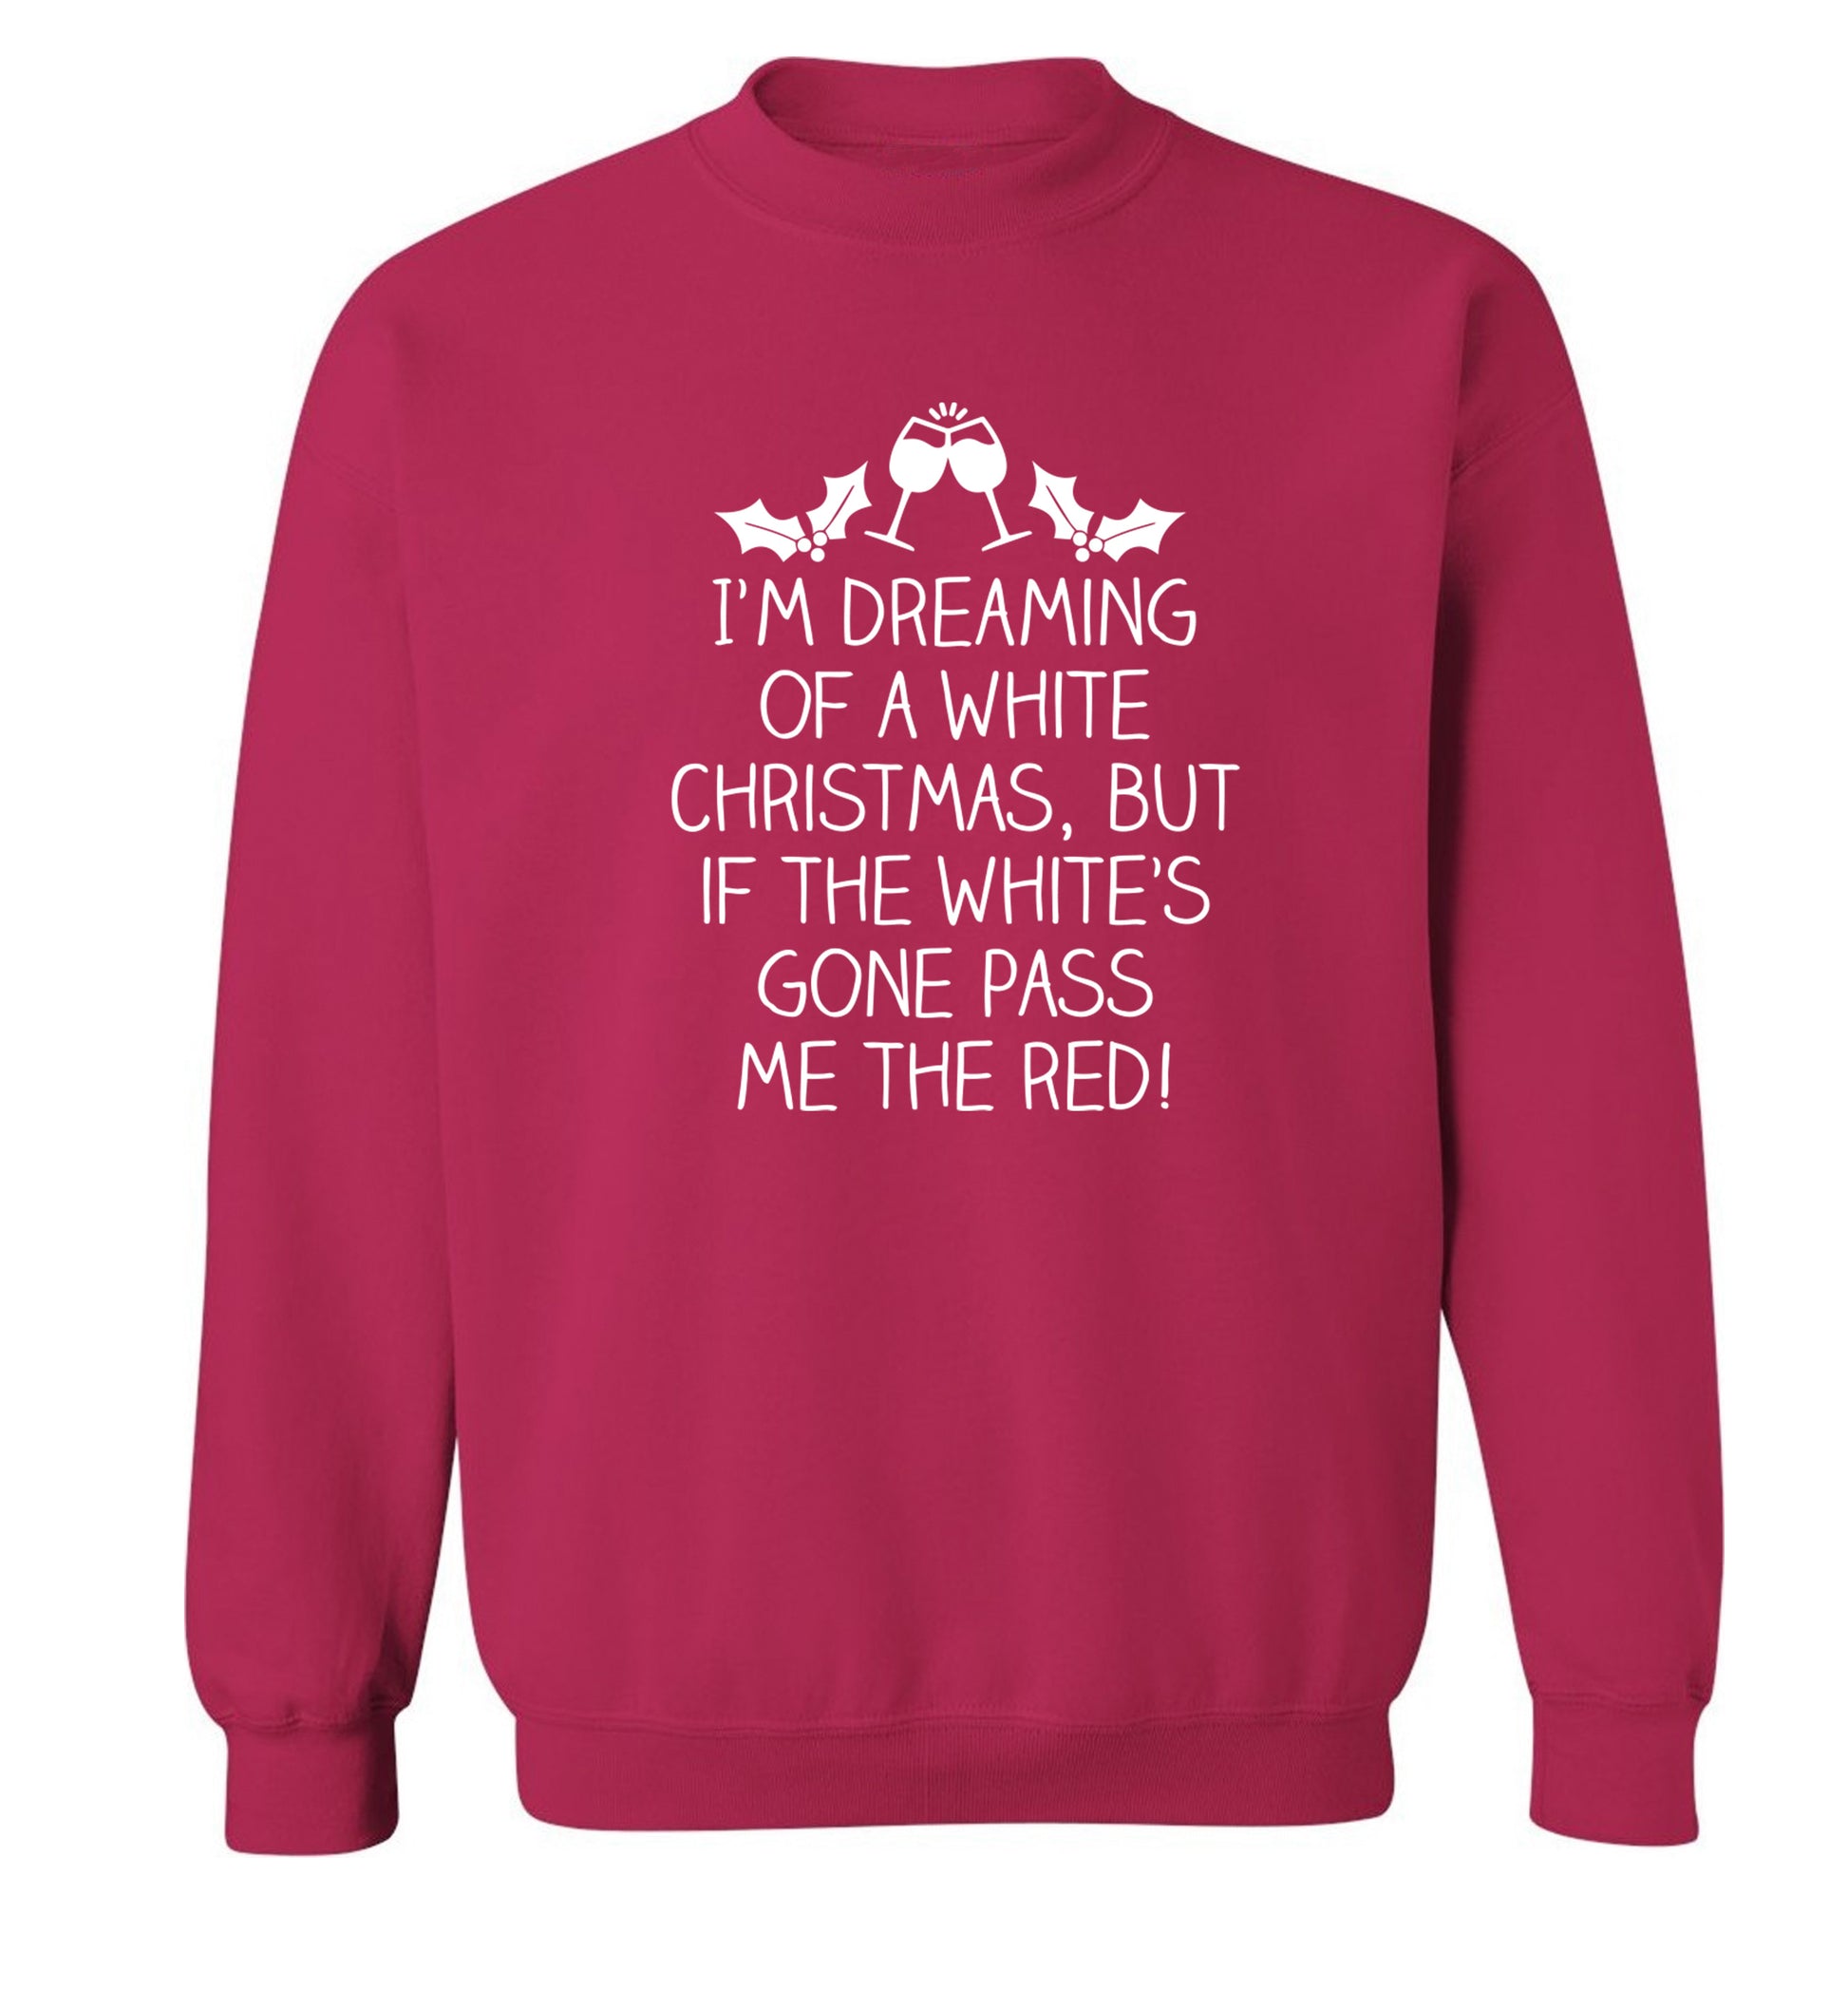 I'm dreaming of a white christmas, but if the white's gone pass me the red! Adult's unisex pink Sweater 2XL